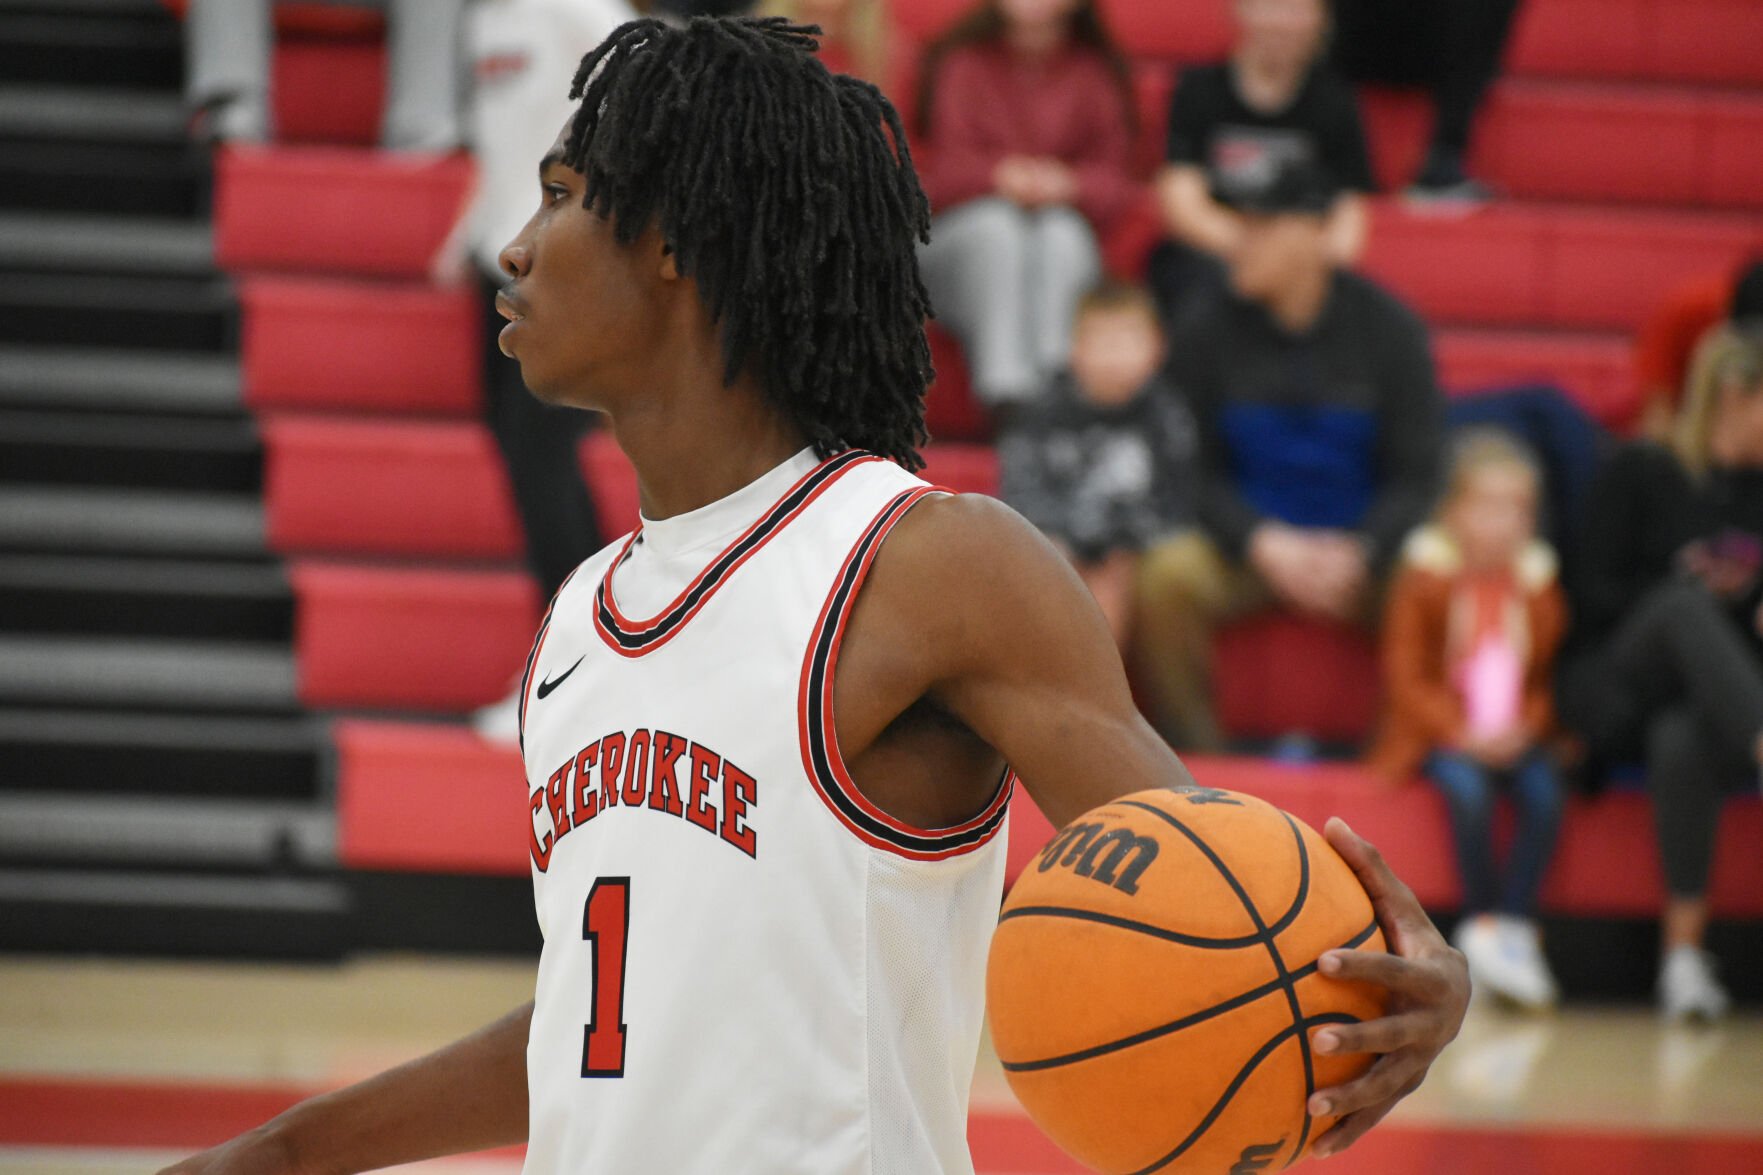 Meet Lawrence Sanford: The Basketball Prodigy Taking Cherokee to State Championship